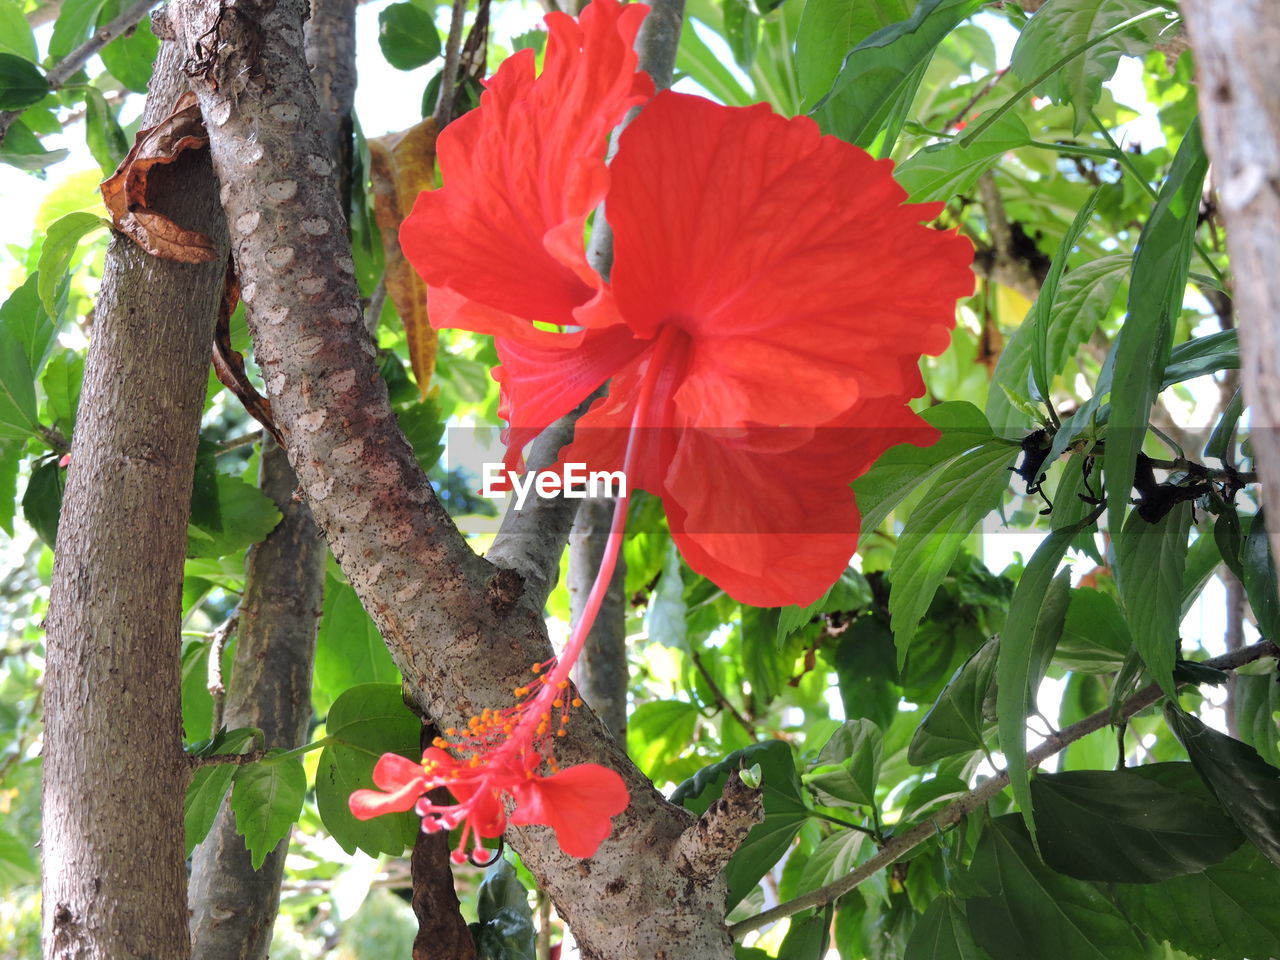 CLOSE-UP OF RED HIBISCUS FLOWER ON TREE